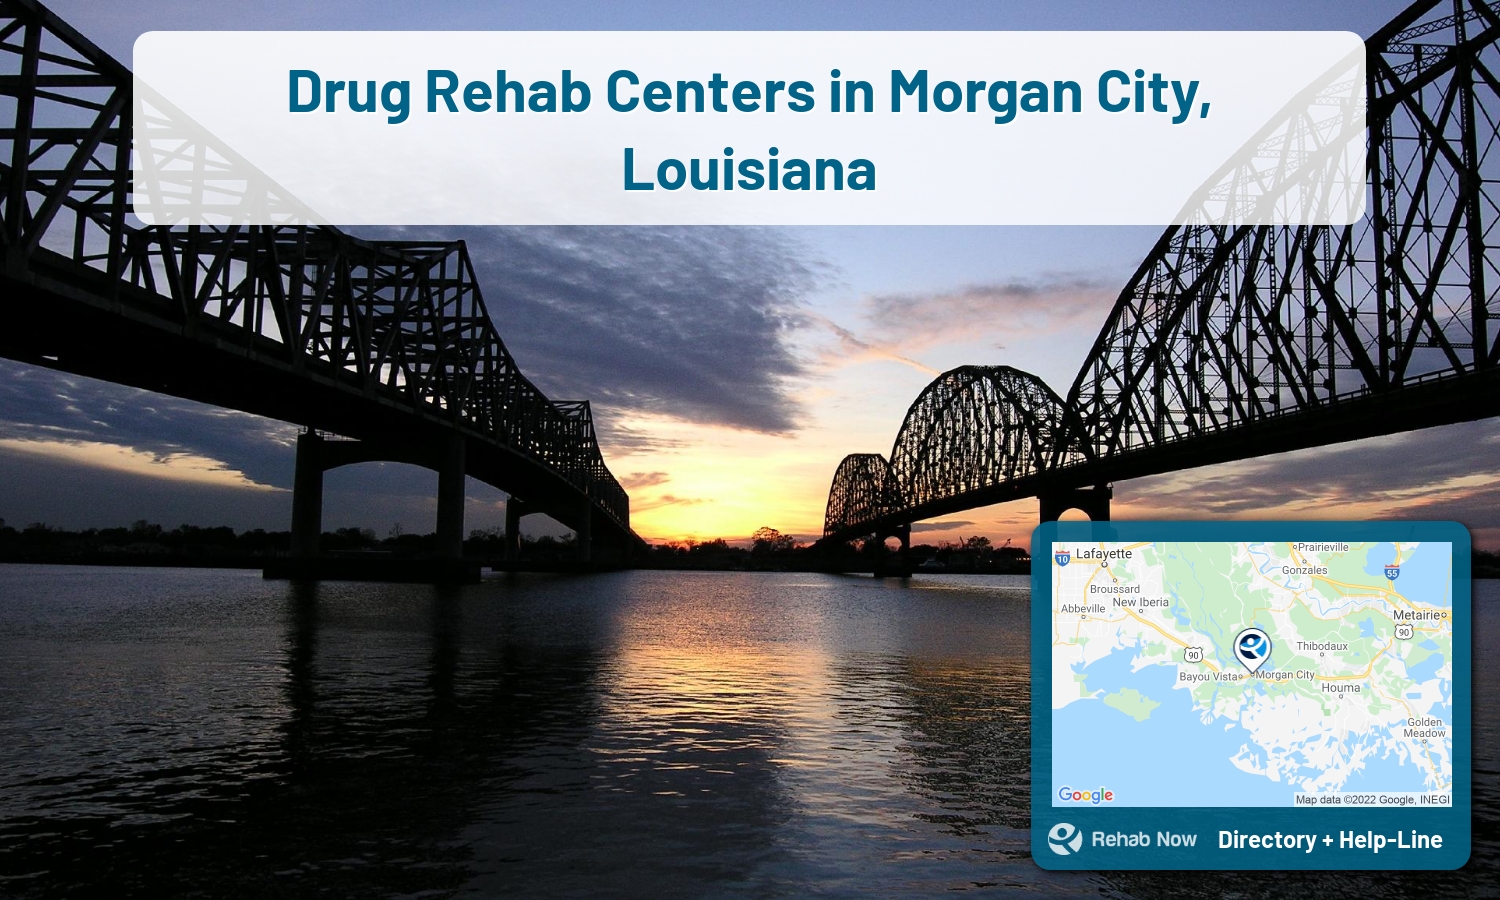 Morgan City, LA Treatment Centers. Find drug rehab in Morgan City, Louisiana, or detox and treatment programs. Get the right help now!